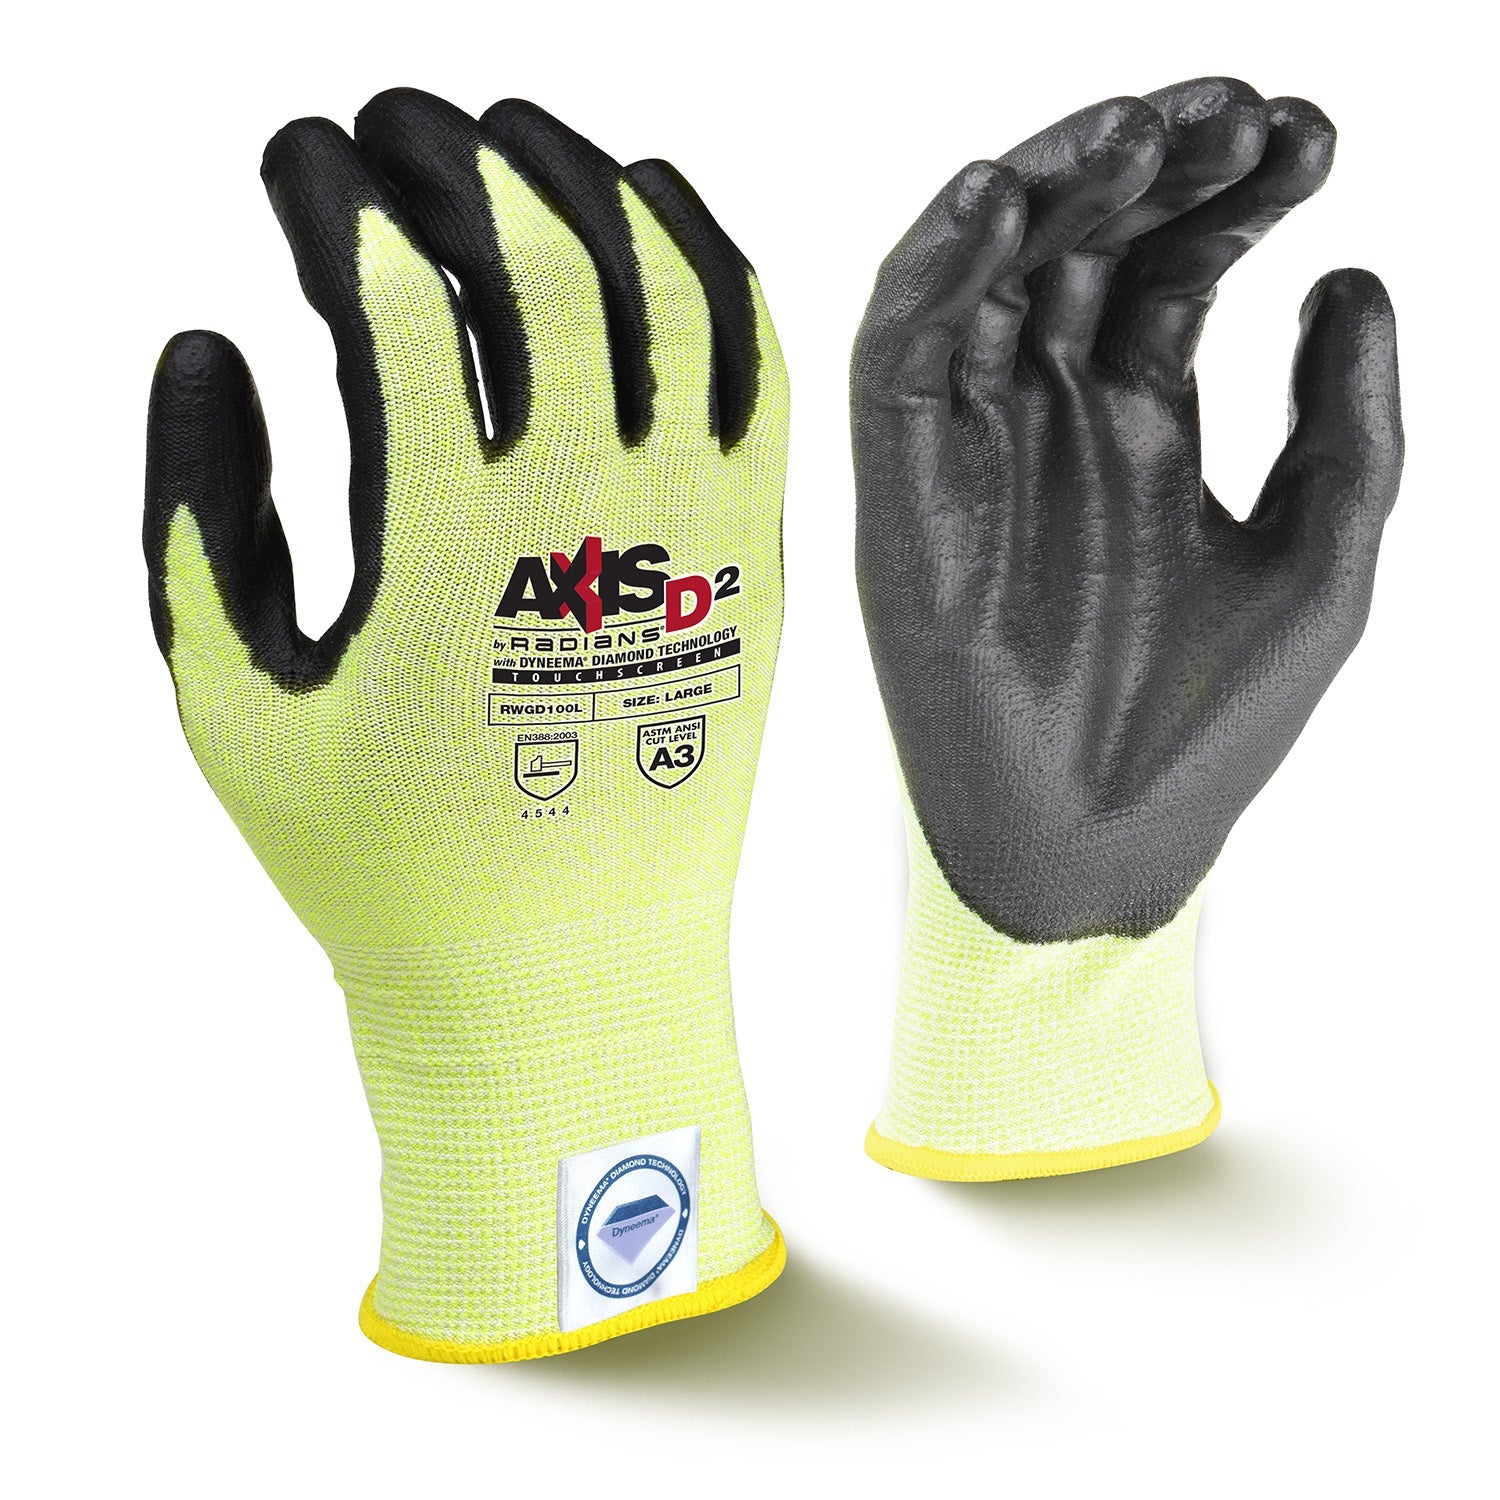 Radians RWGD100 AXIS D2™ Dyneema® Cut Protection Level A3 Touchscreen Glove (PAIR)